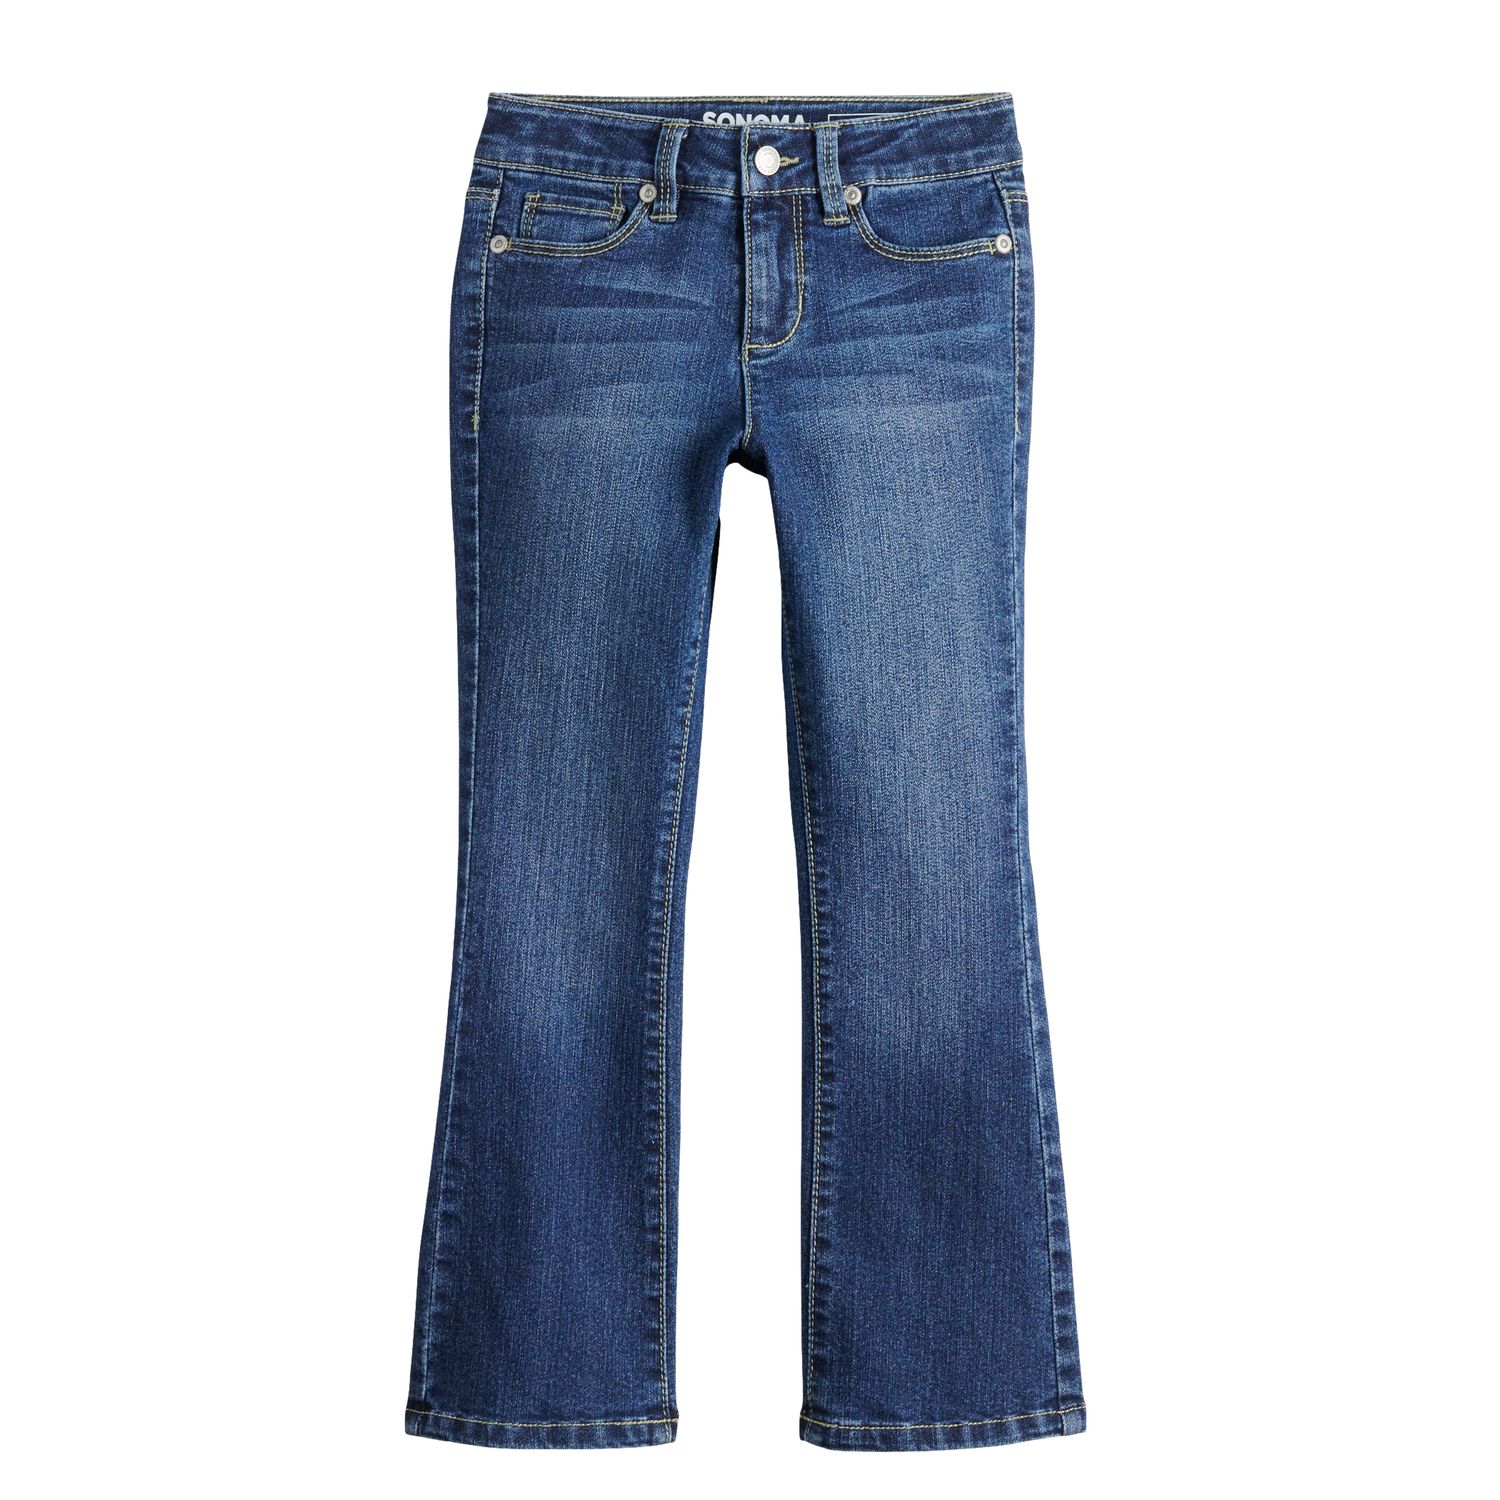 jeans for girls under 500